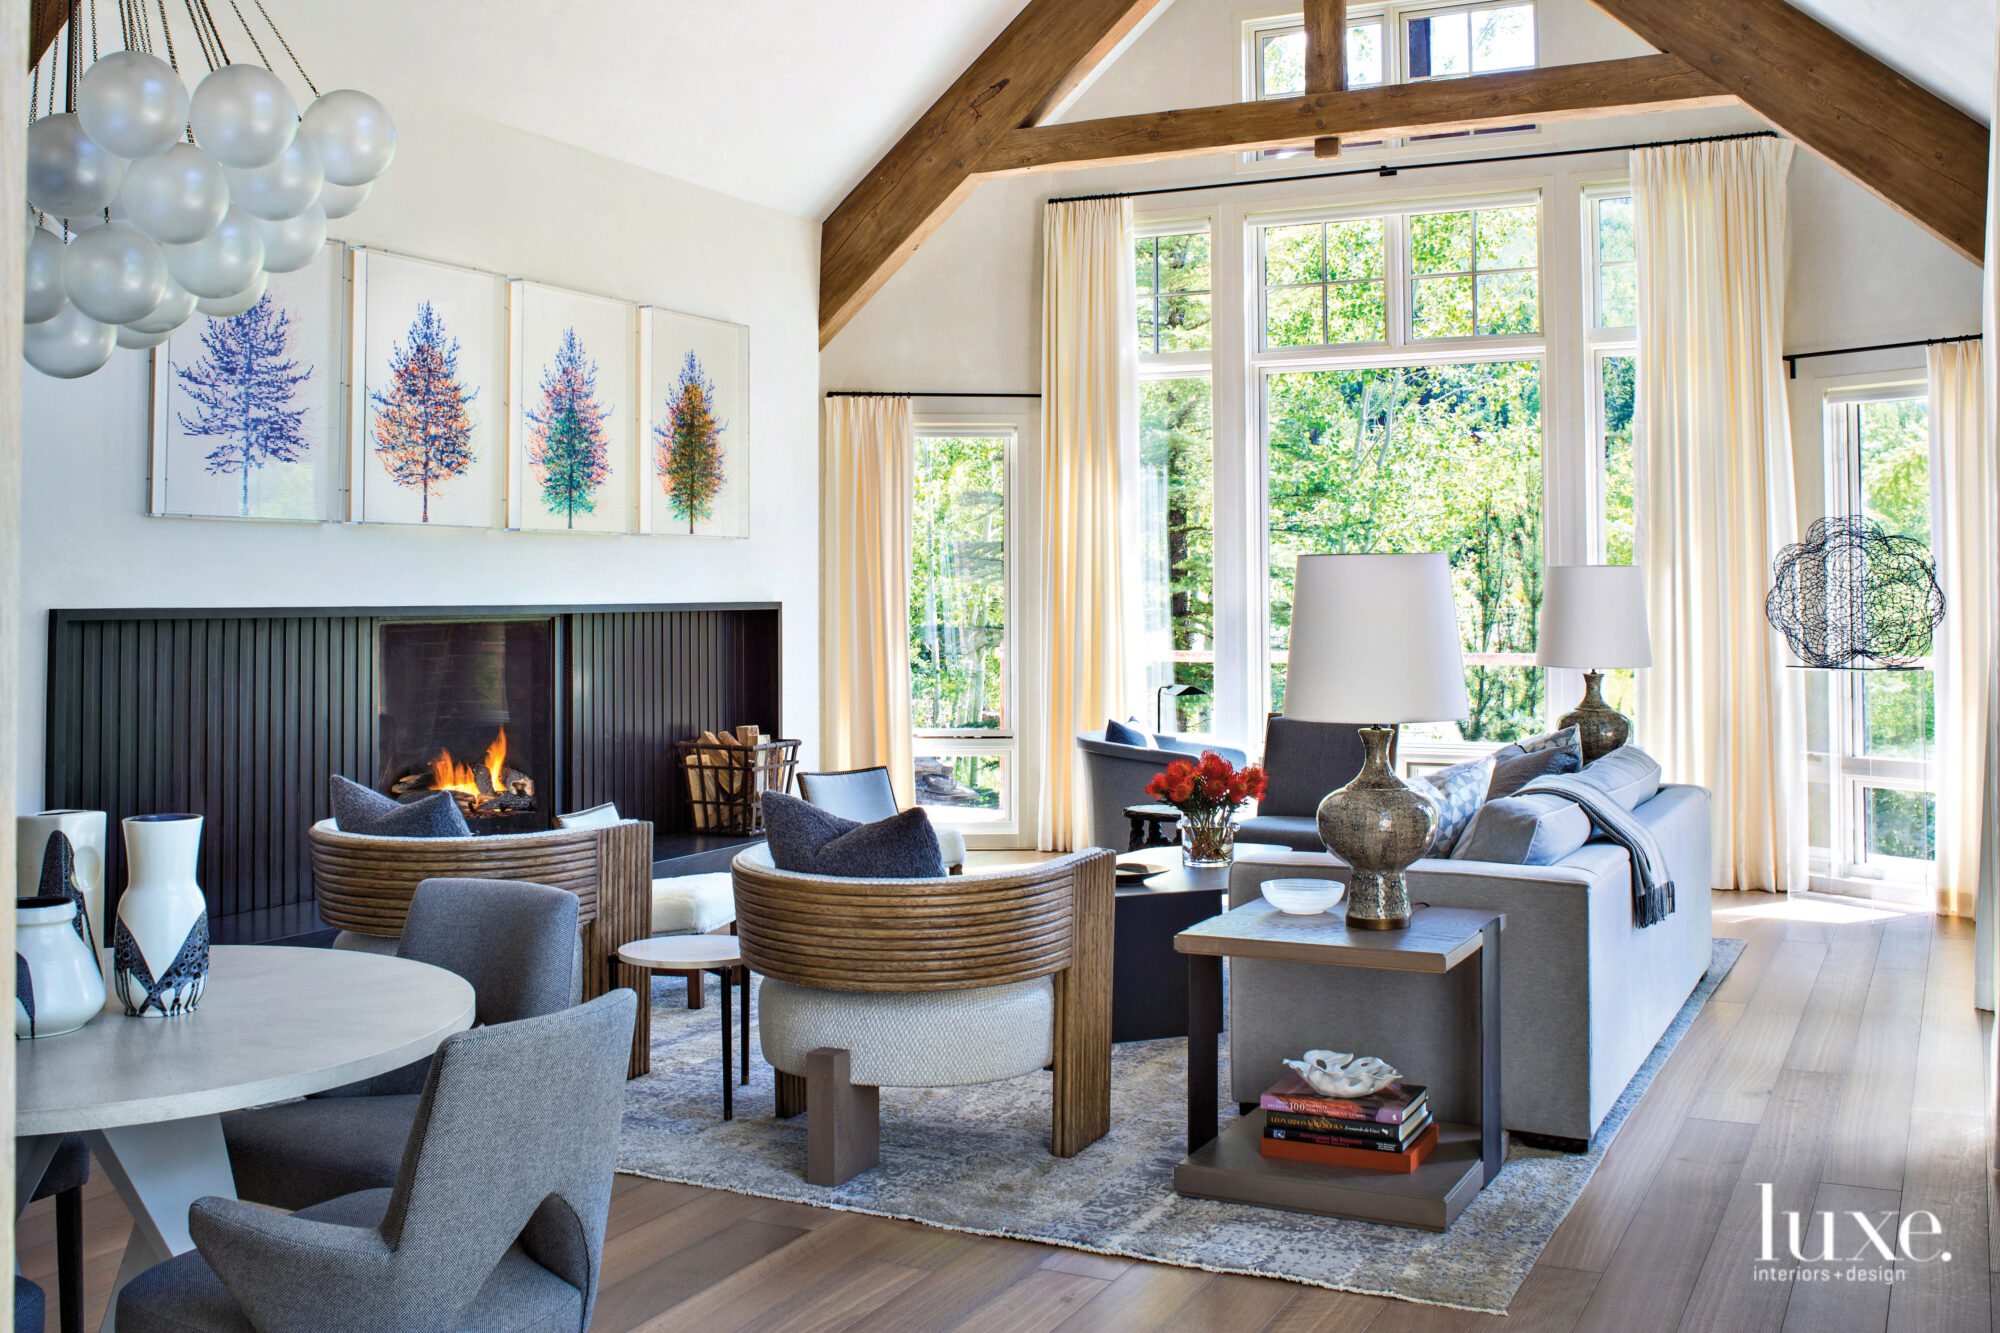 A living room is arranged around a fireplace. A row of colorful tree artwork hangs above the mantle.